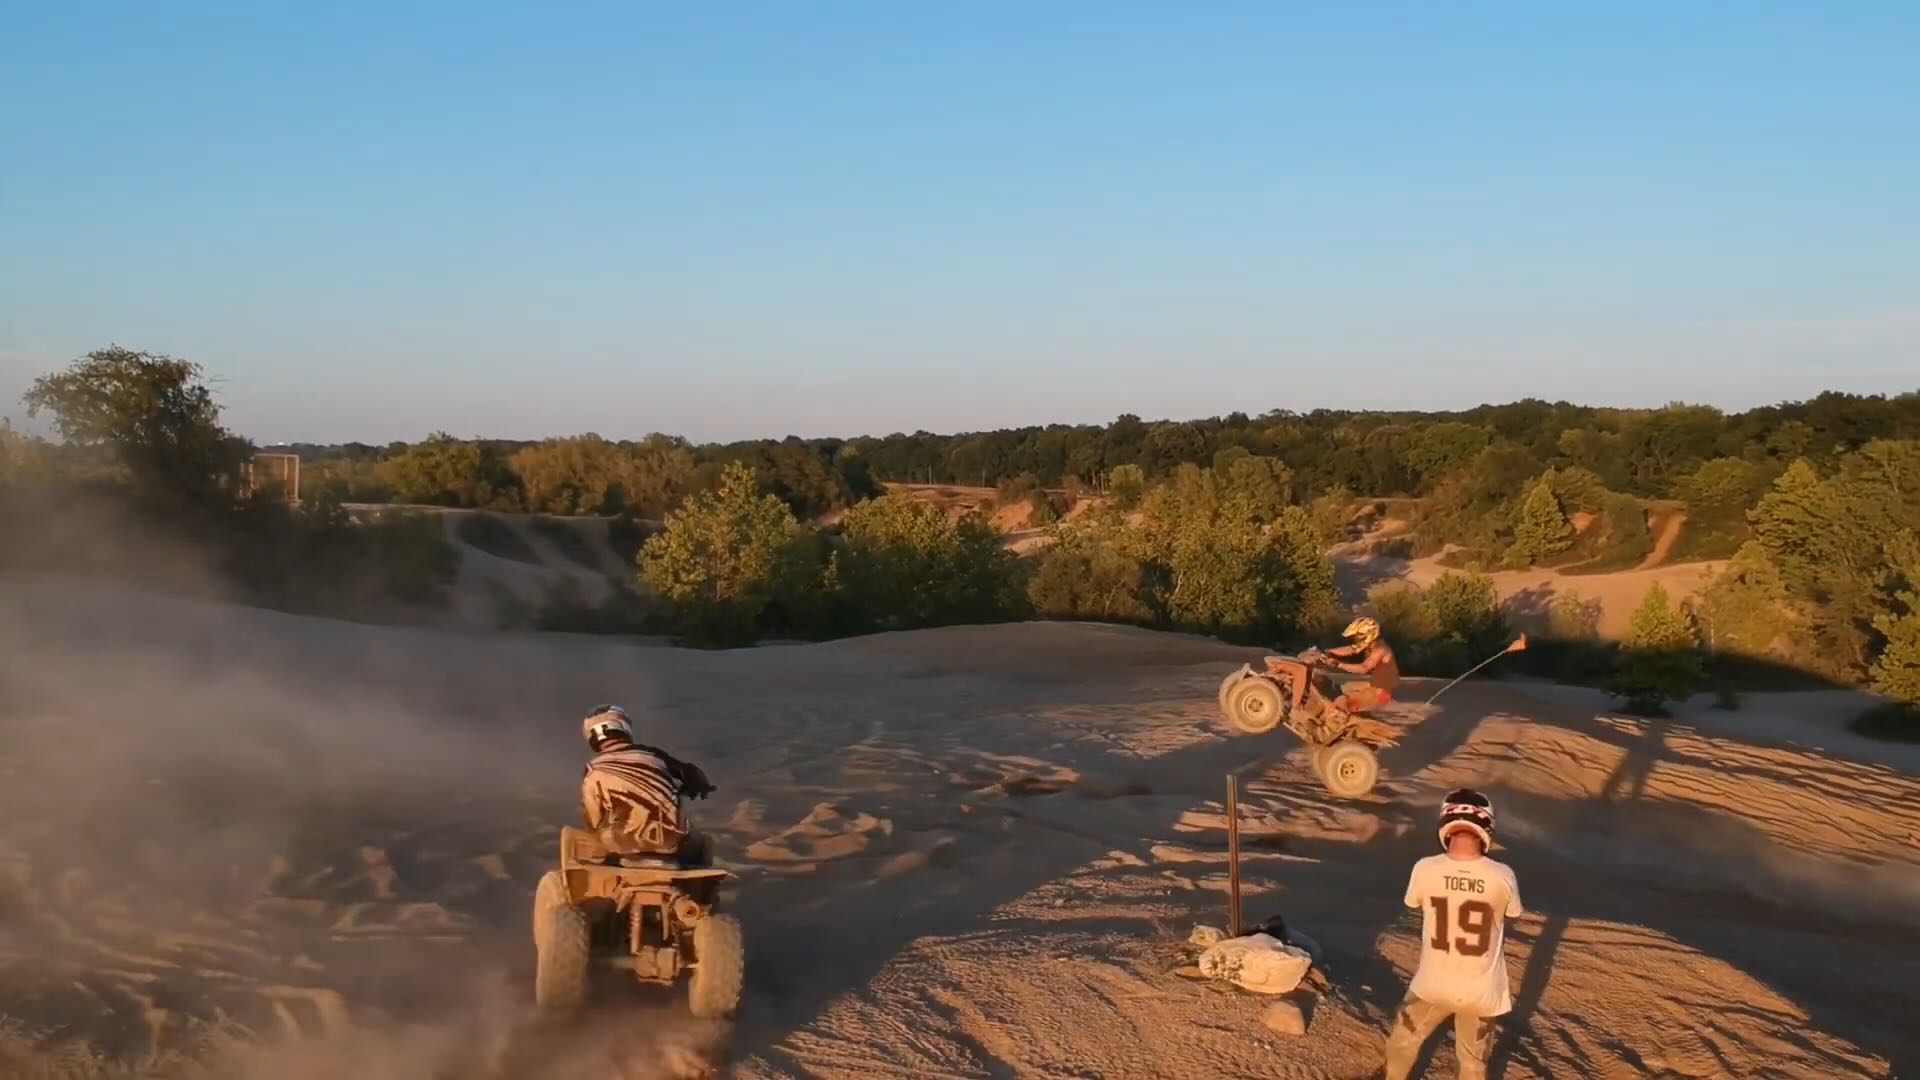 Off-Roading in the Indiana Badlands